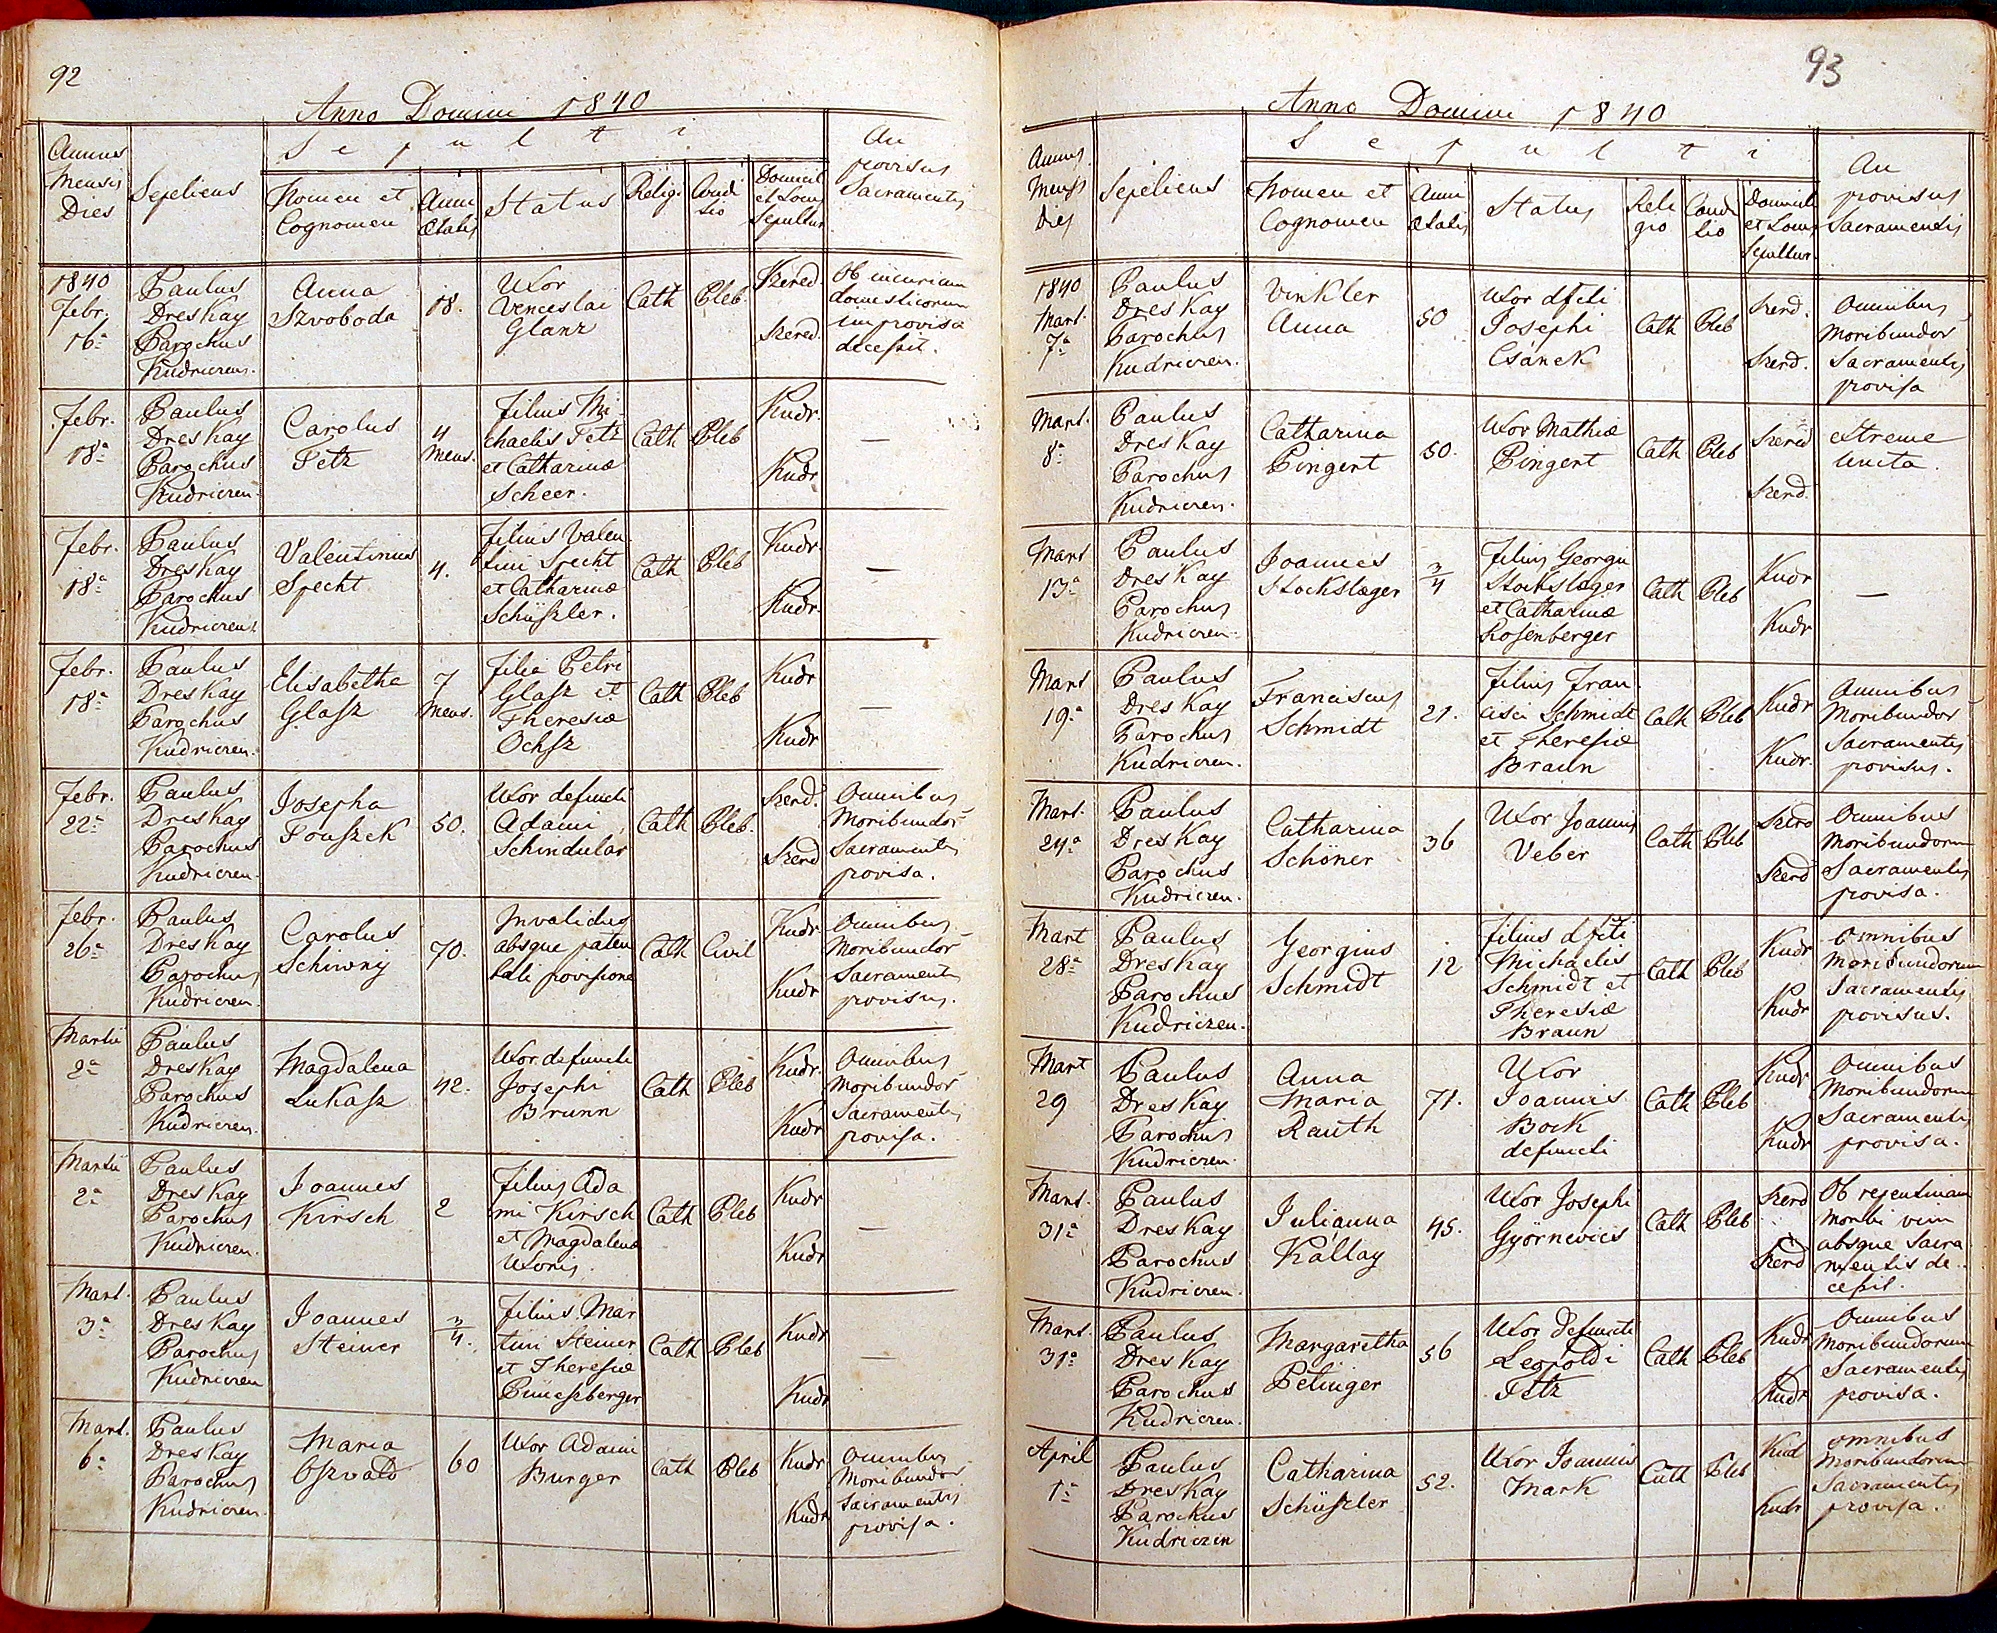 images/church_records/DEATHS/1775-1828D/092 i 093